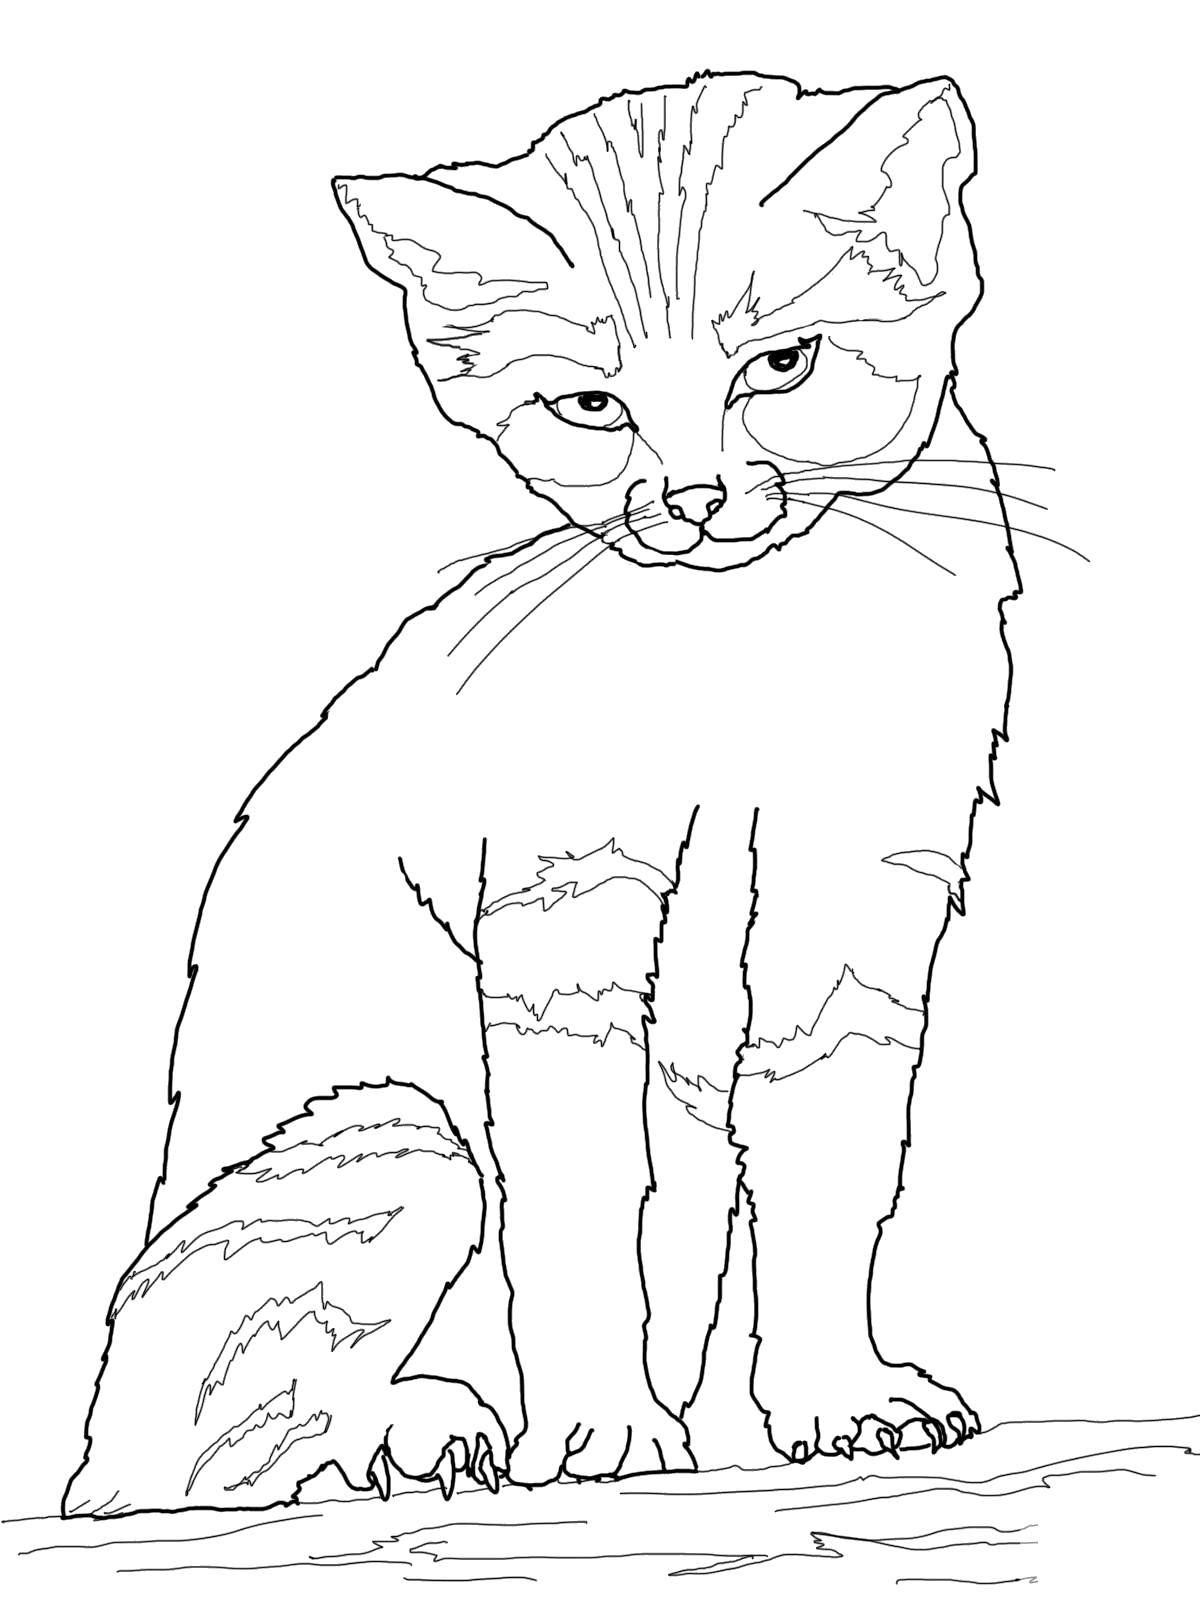 Coloring Crafty kitty. Category Cats and kittens. Tags:  Animals, kitten.